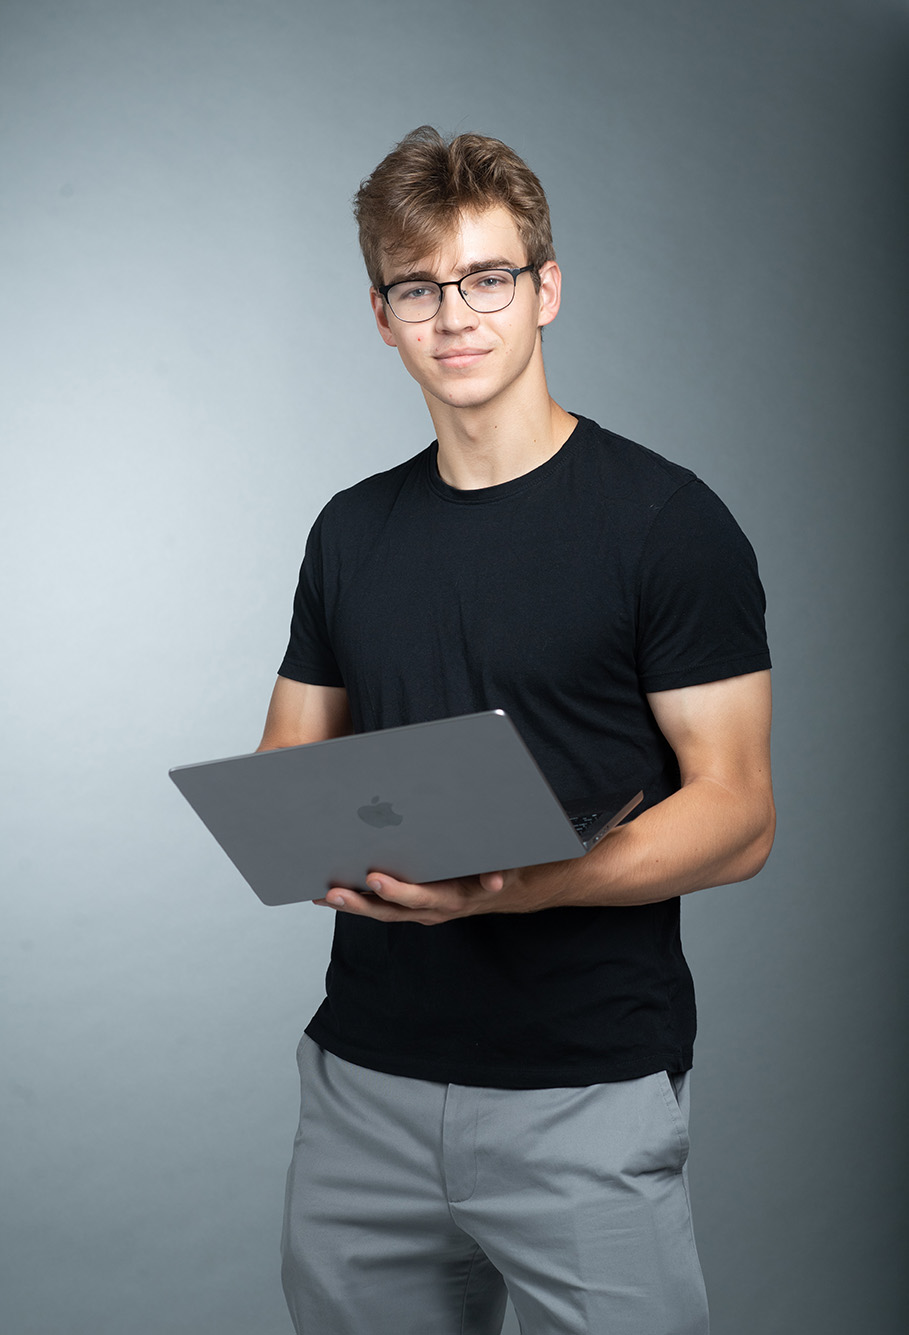 Photo: Ben Gardiner poses in front of dark grey backdrop with Apple laptop in hands. A young white man with wearing glasses, a black short-sleeved shirt and greypants, stands and poses with his laptop in held in front of him.